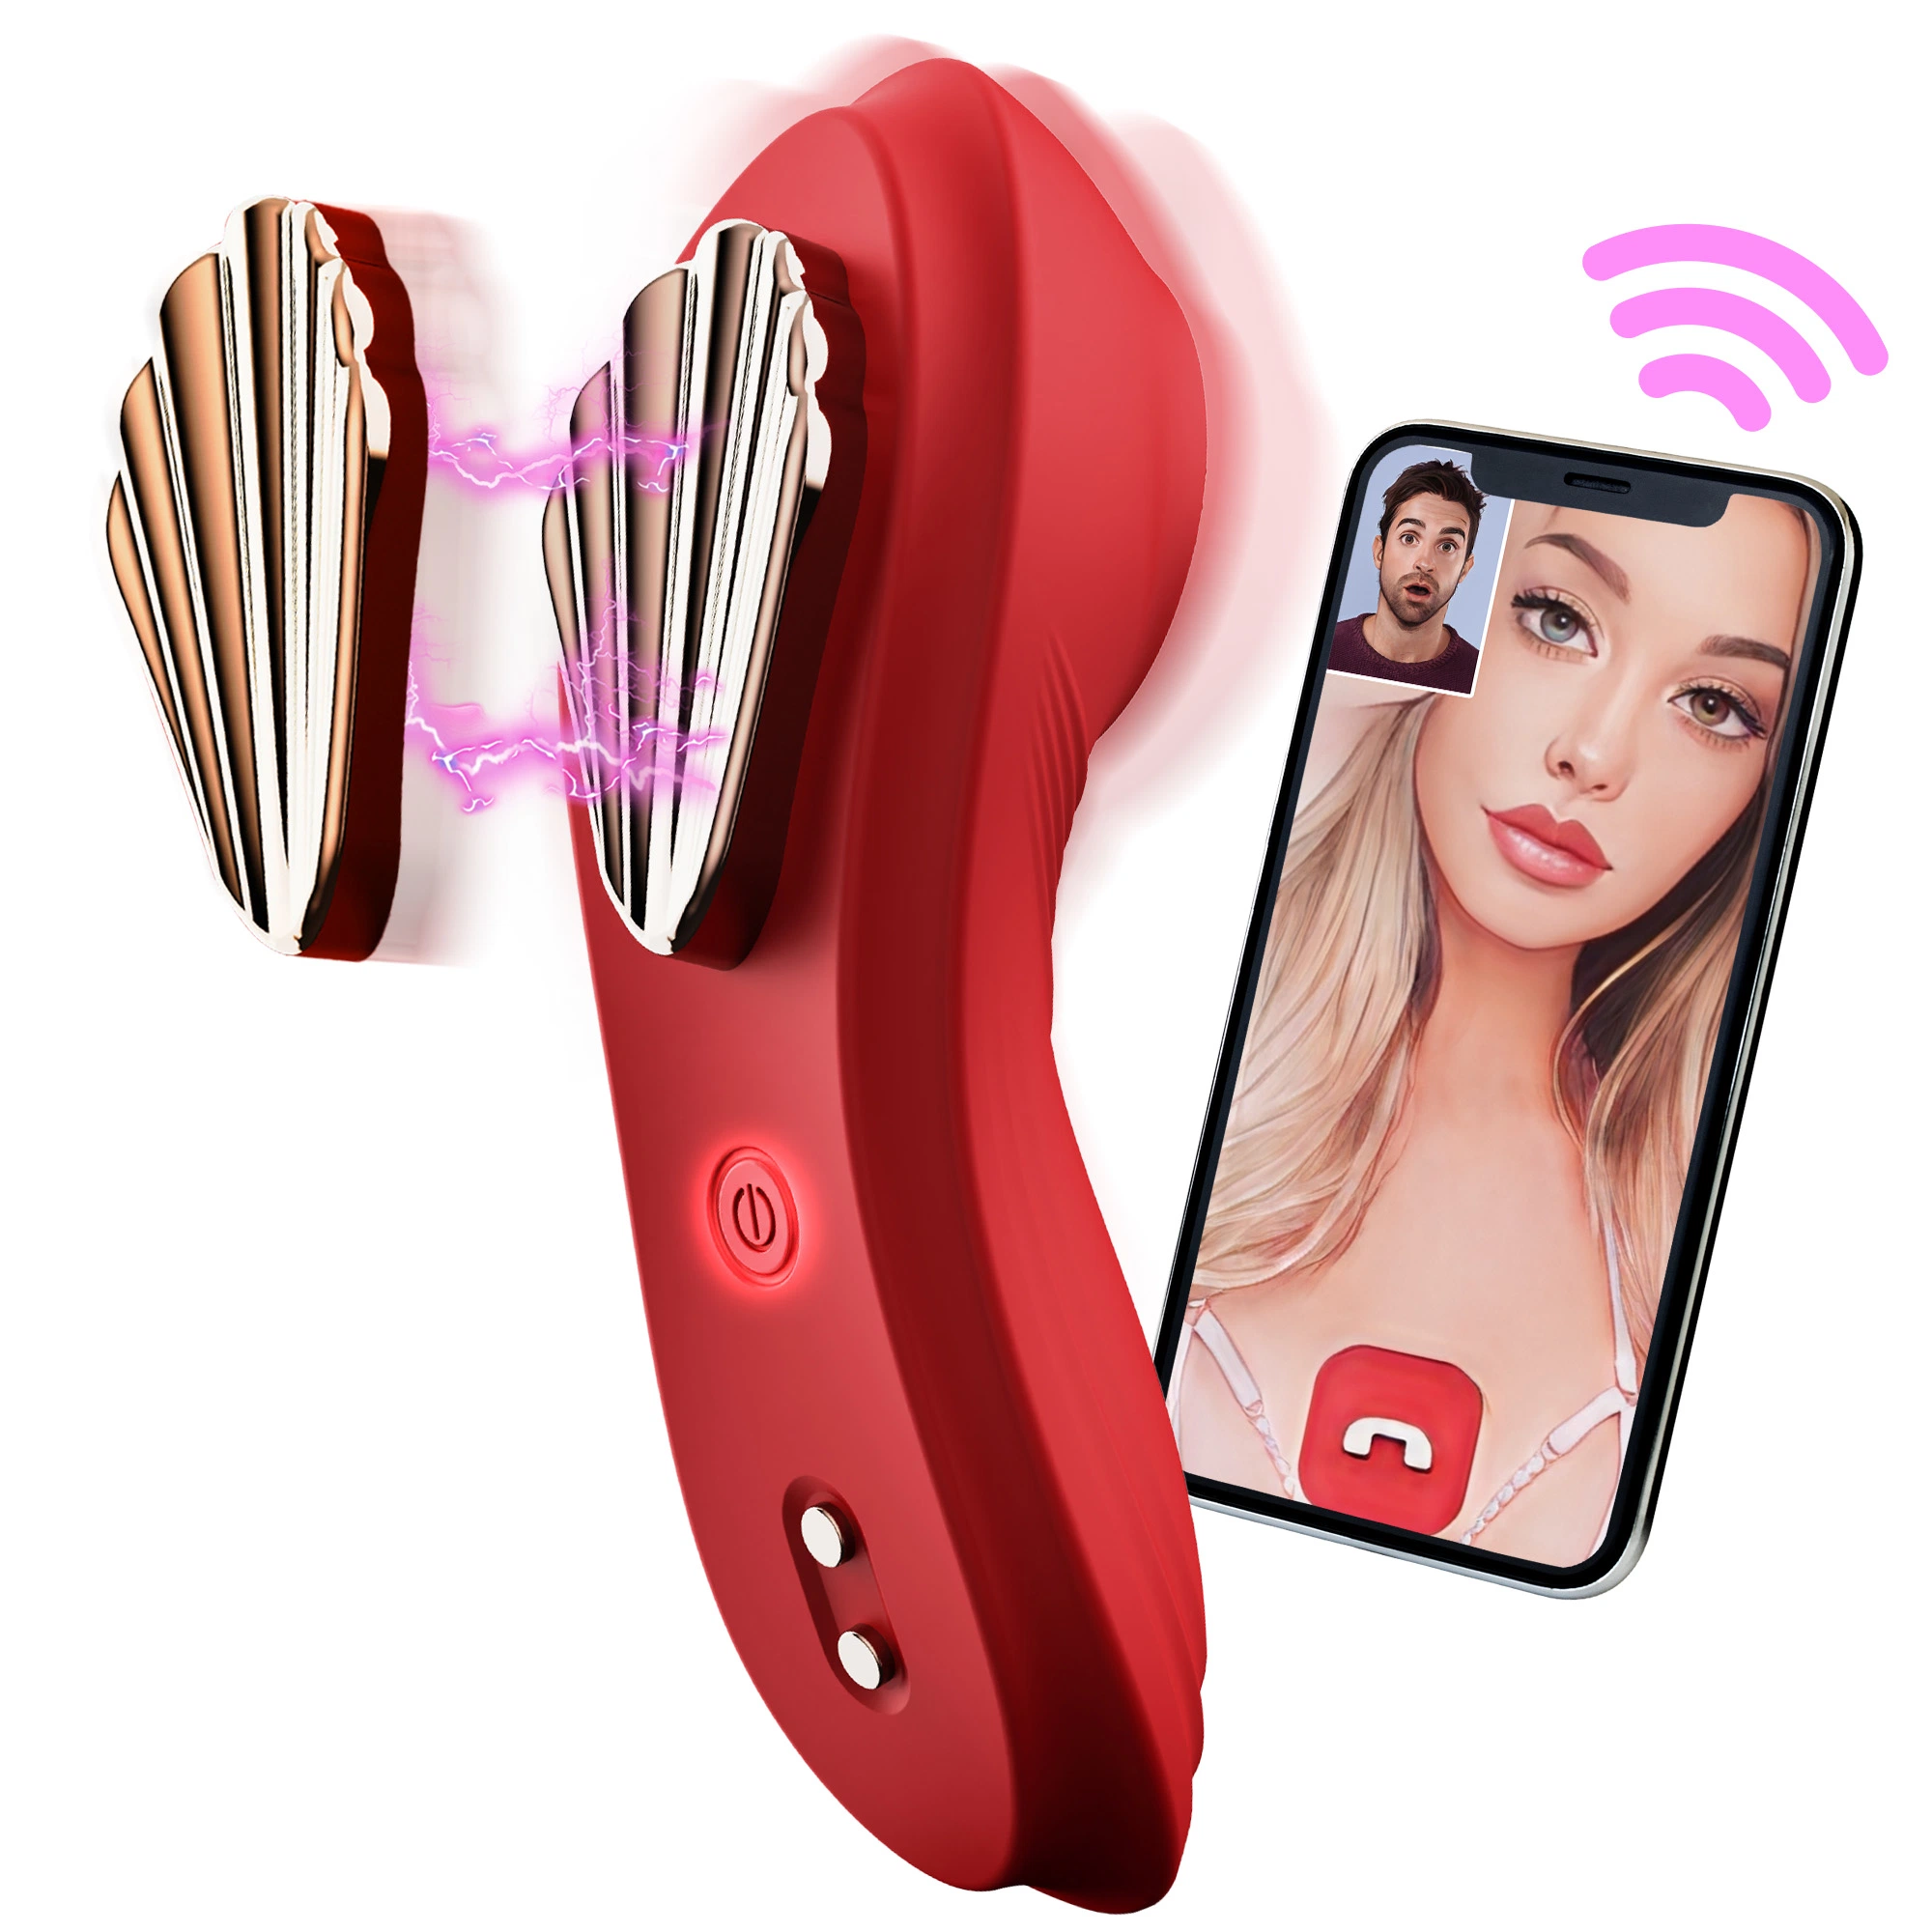 Wearable Panty Vibrator Wireless Remote Control Vibrating Egg Waterproof Rechargeable Butterfly Vibrator Low Noise Clitoral Stimulator Sex Toy for Women